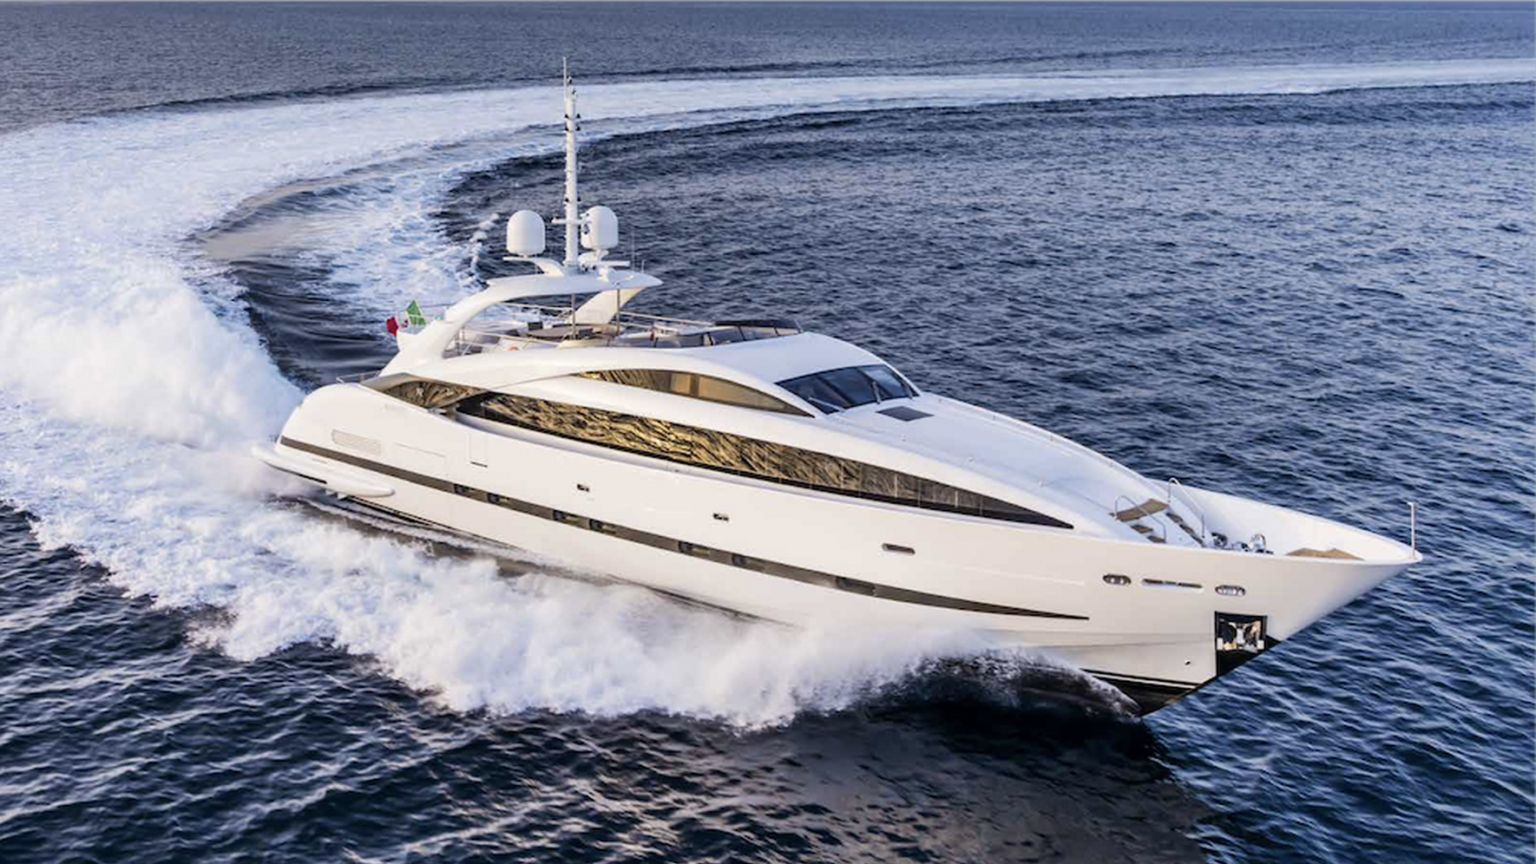 ISA Yachts for Sale - ISA Yachts Prices - TWW Yachts